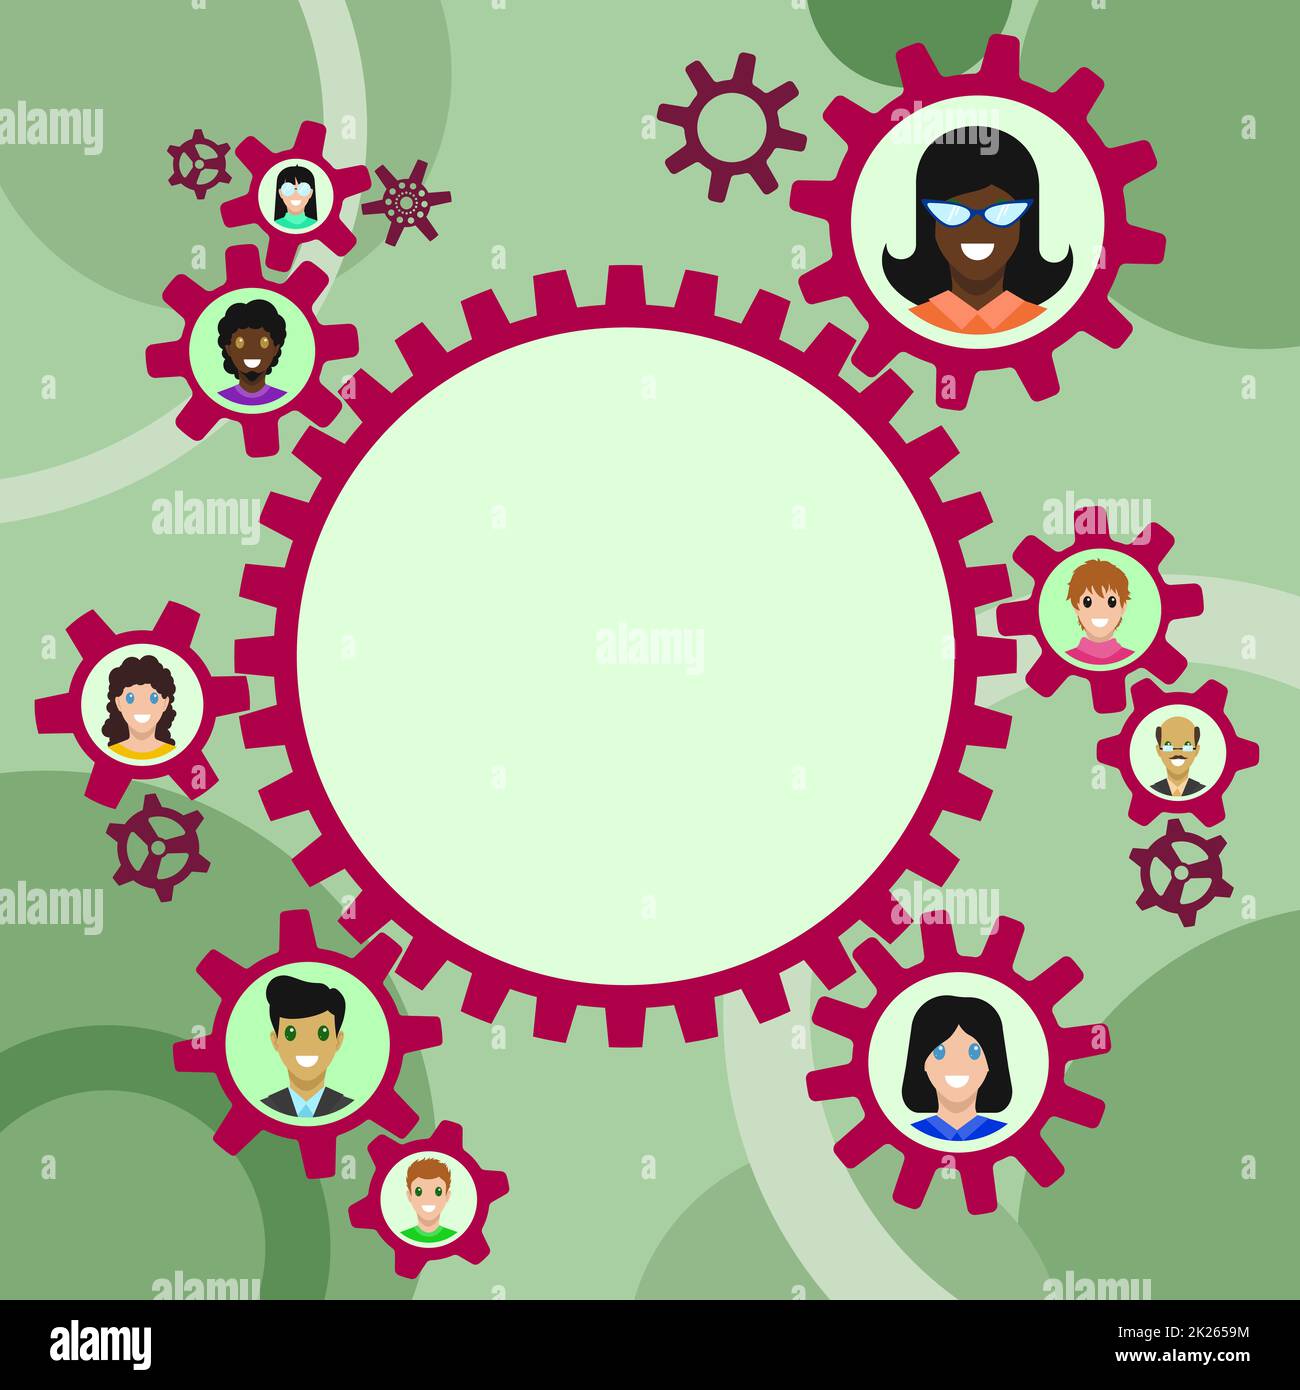 Colleagues Presented Inside Cogwheels Showing Definition Of Teamwork. Coworkers Faces Shown Gear Transmission Presenting Unity Relation. Stock Photo